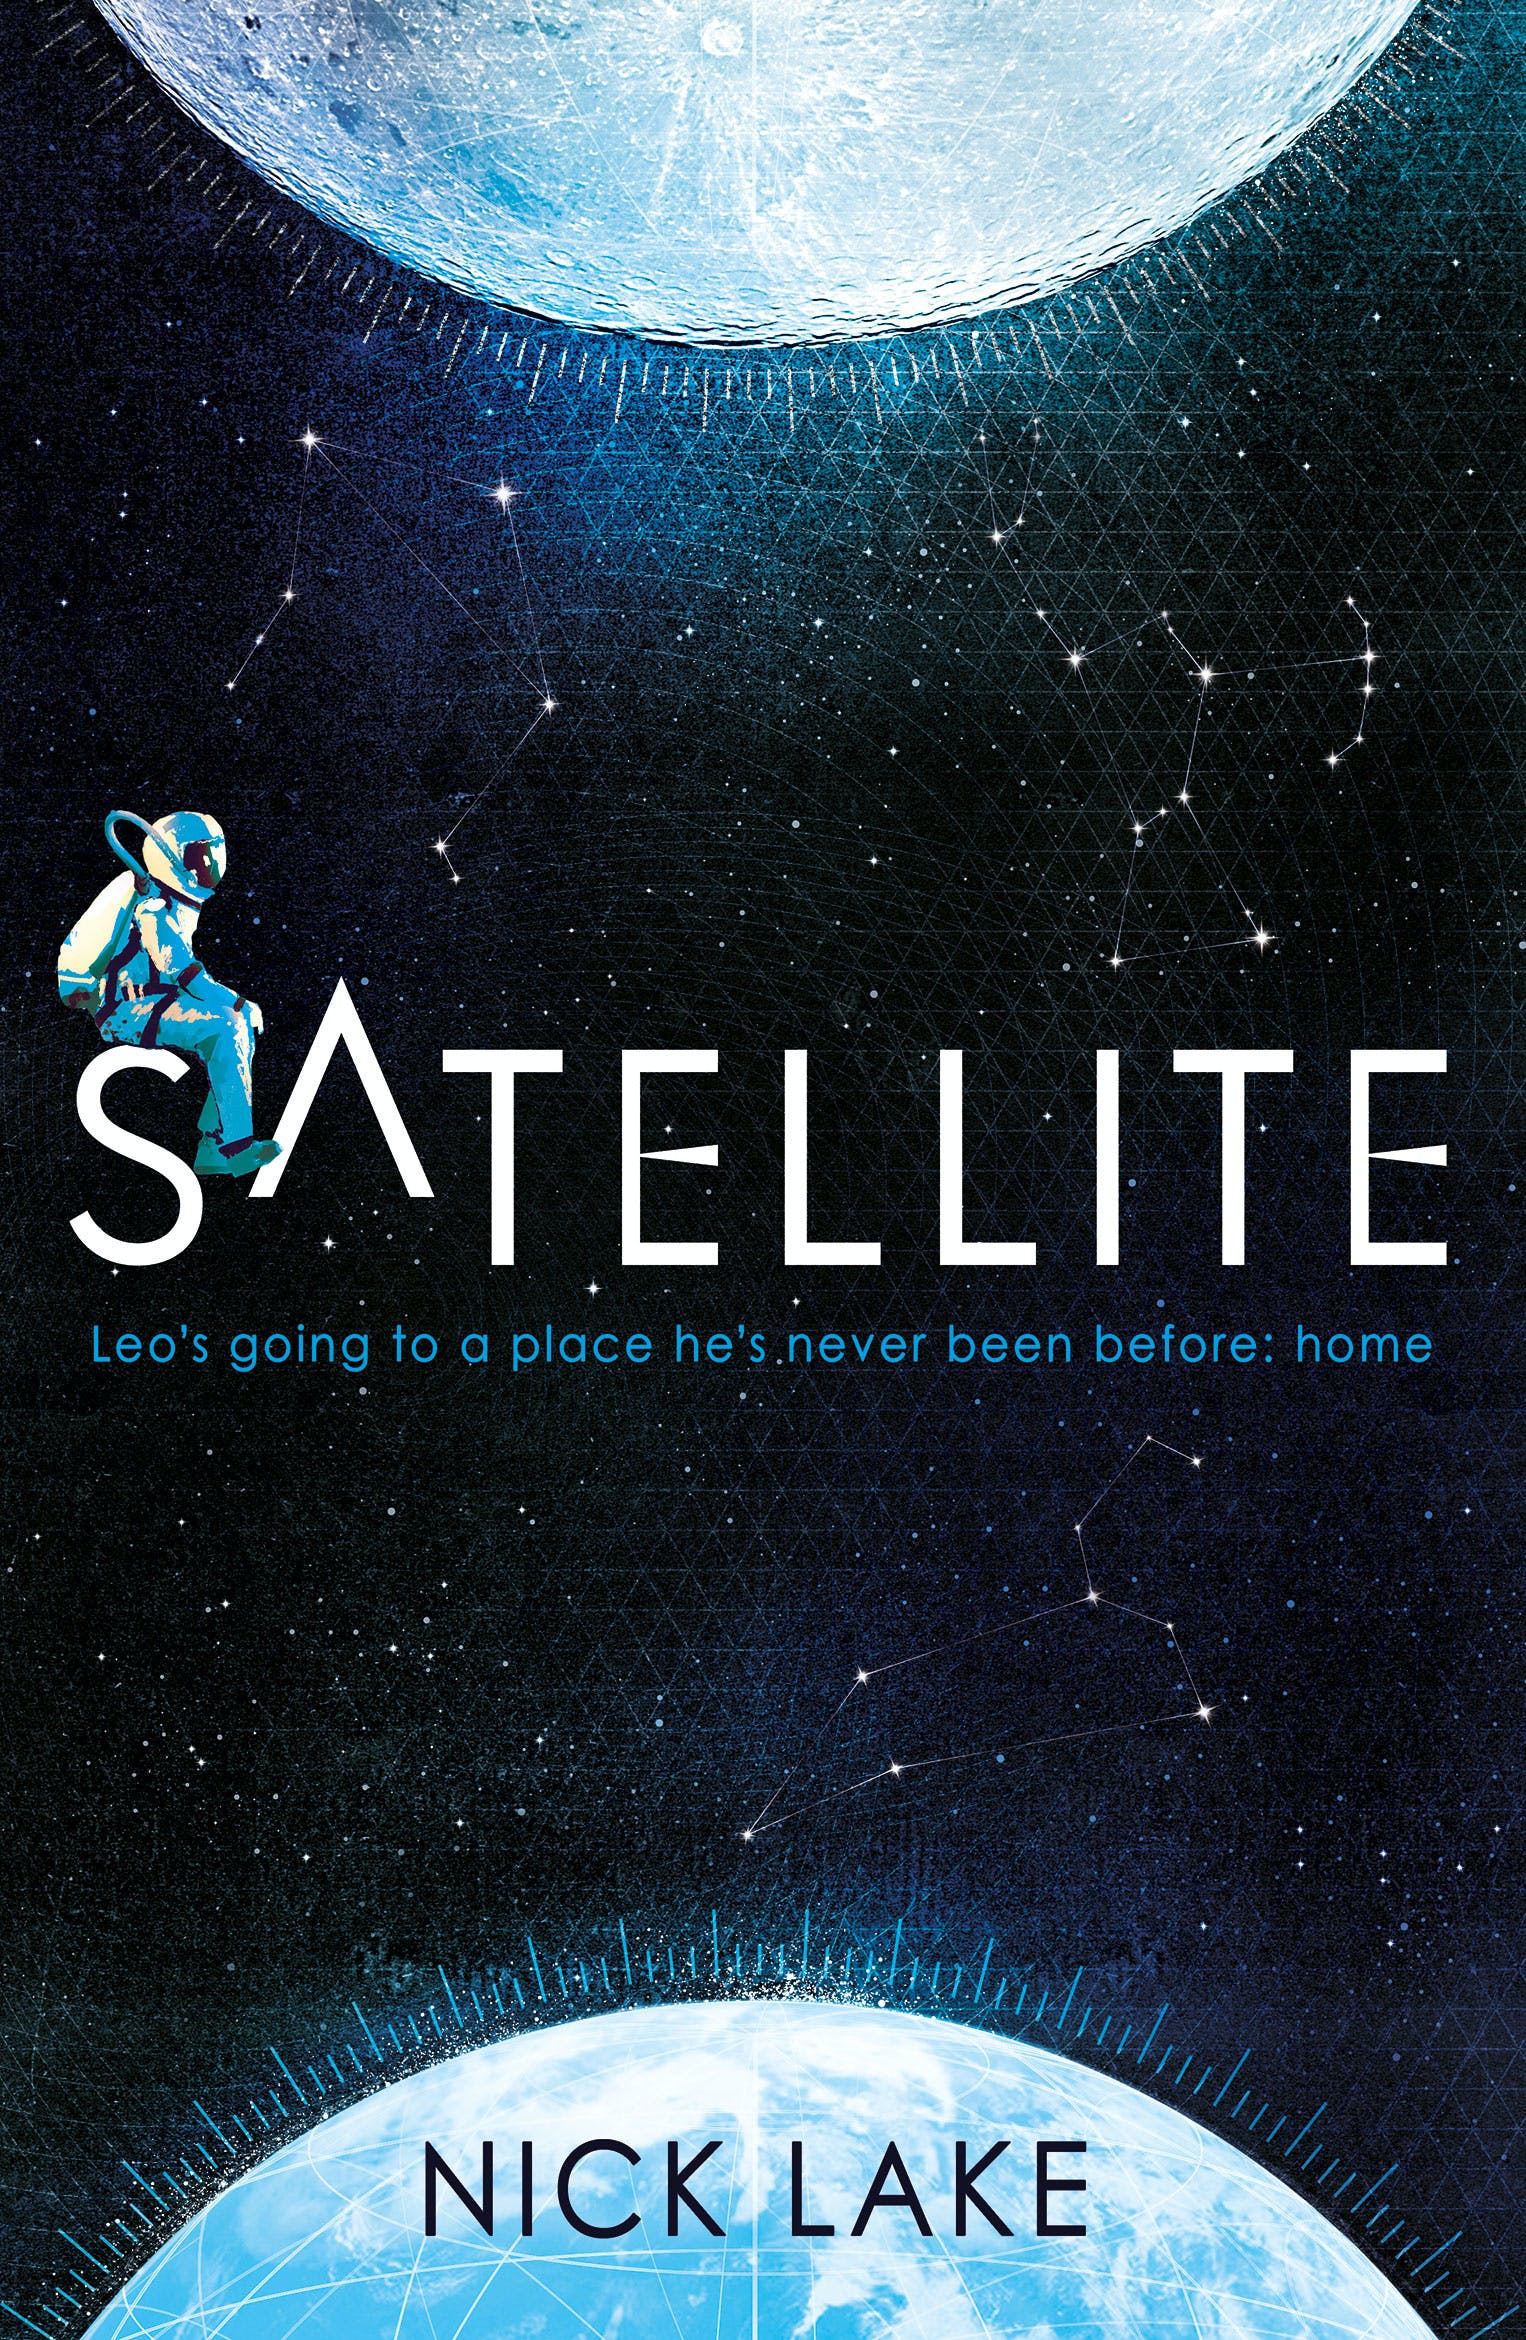 Cover of Satellite by Nick Lake.